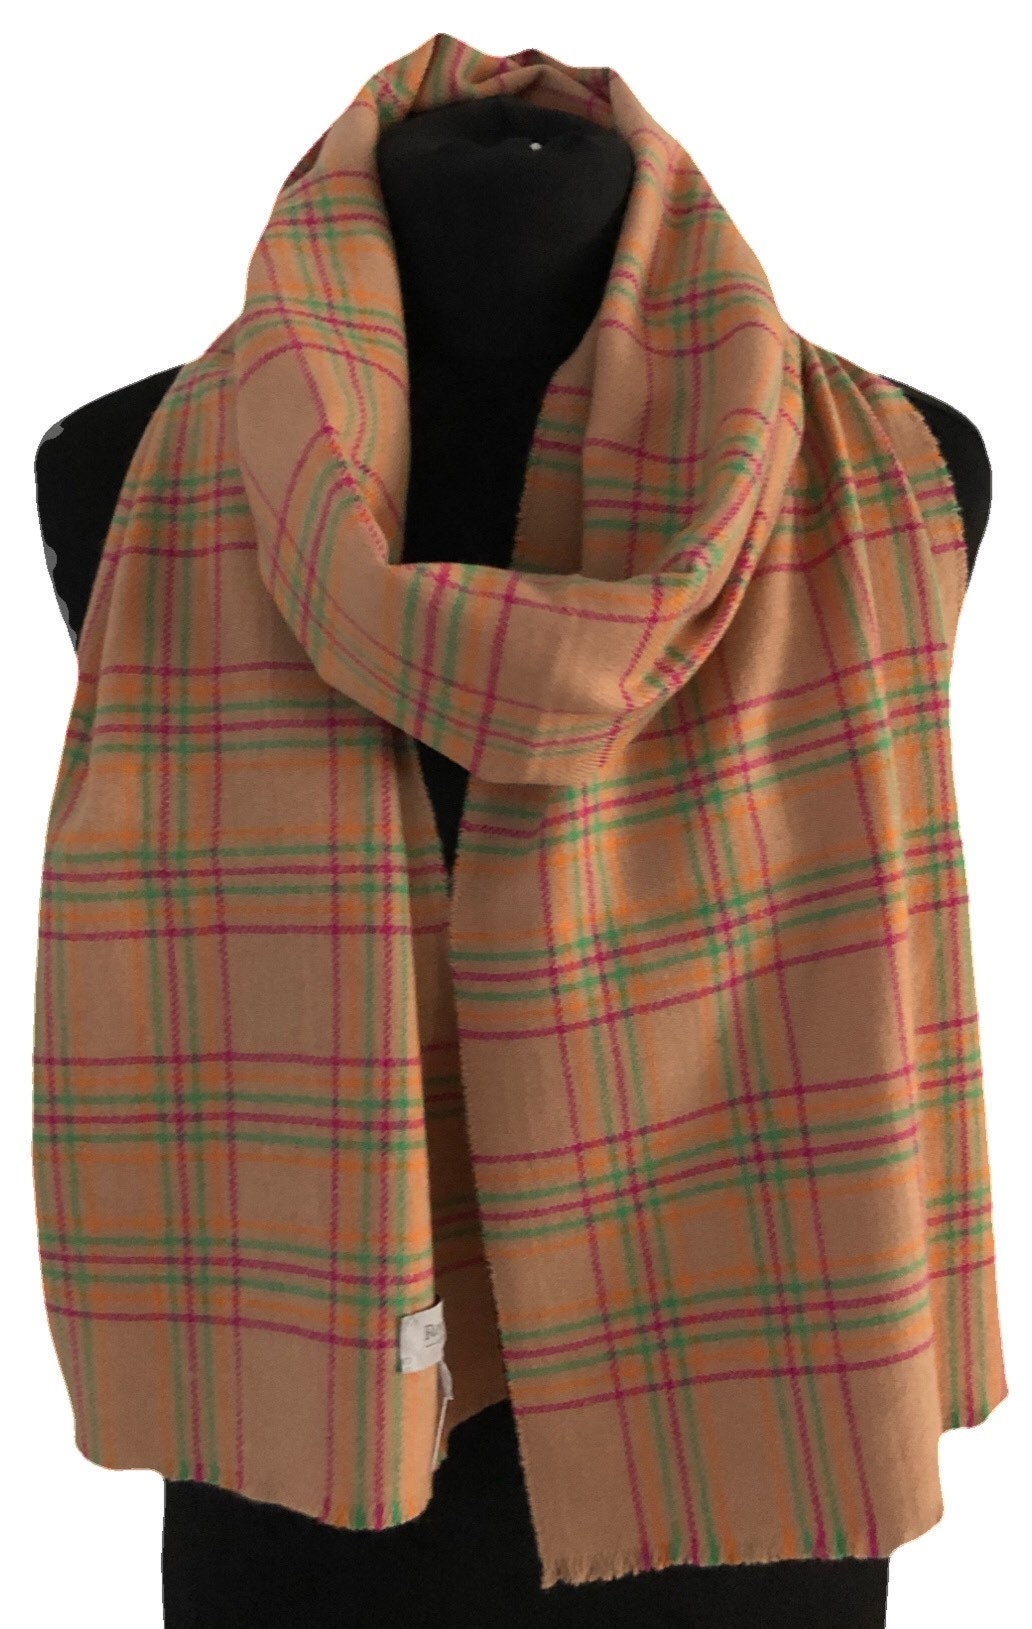 Large Cashmere Checked Scarf Woven in Scotland - Etsy